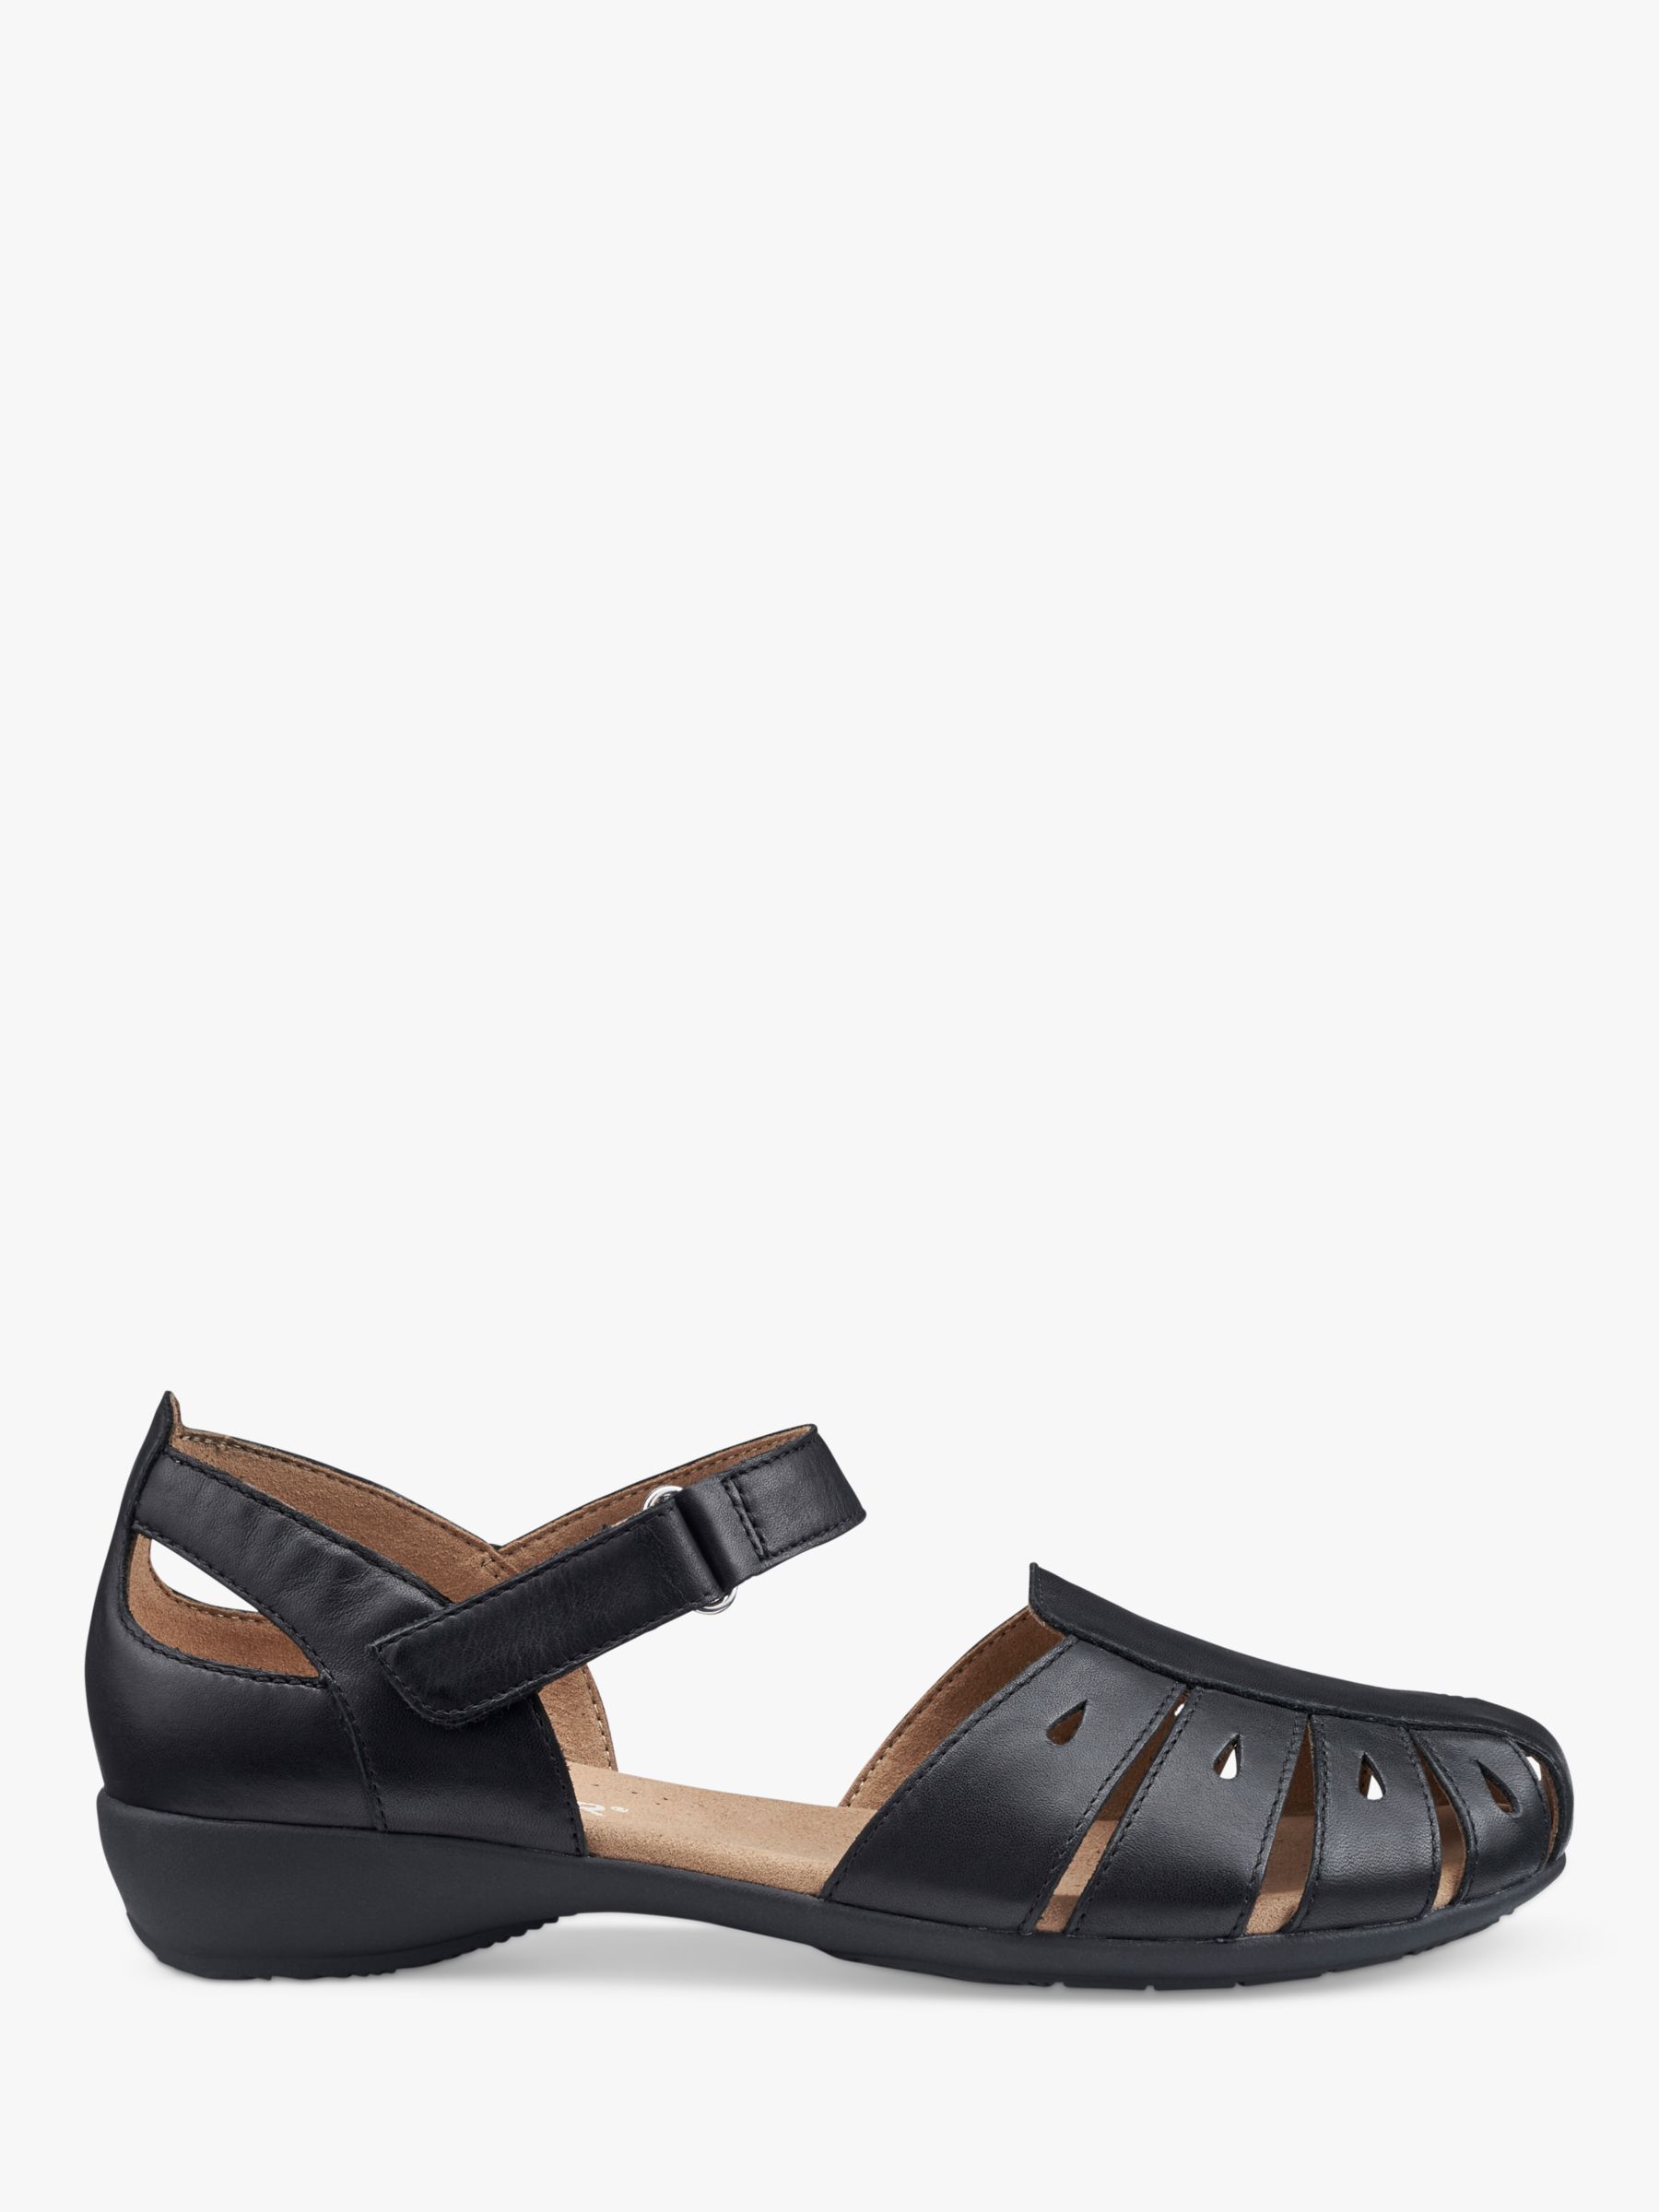 Buy Hotter May Fisherman Style Sandals Online at johnlewis.com